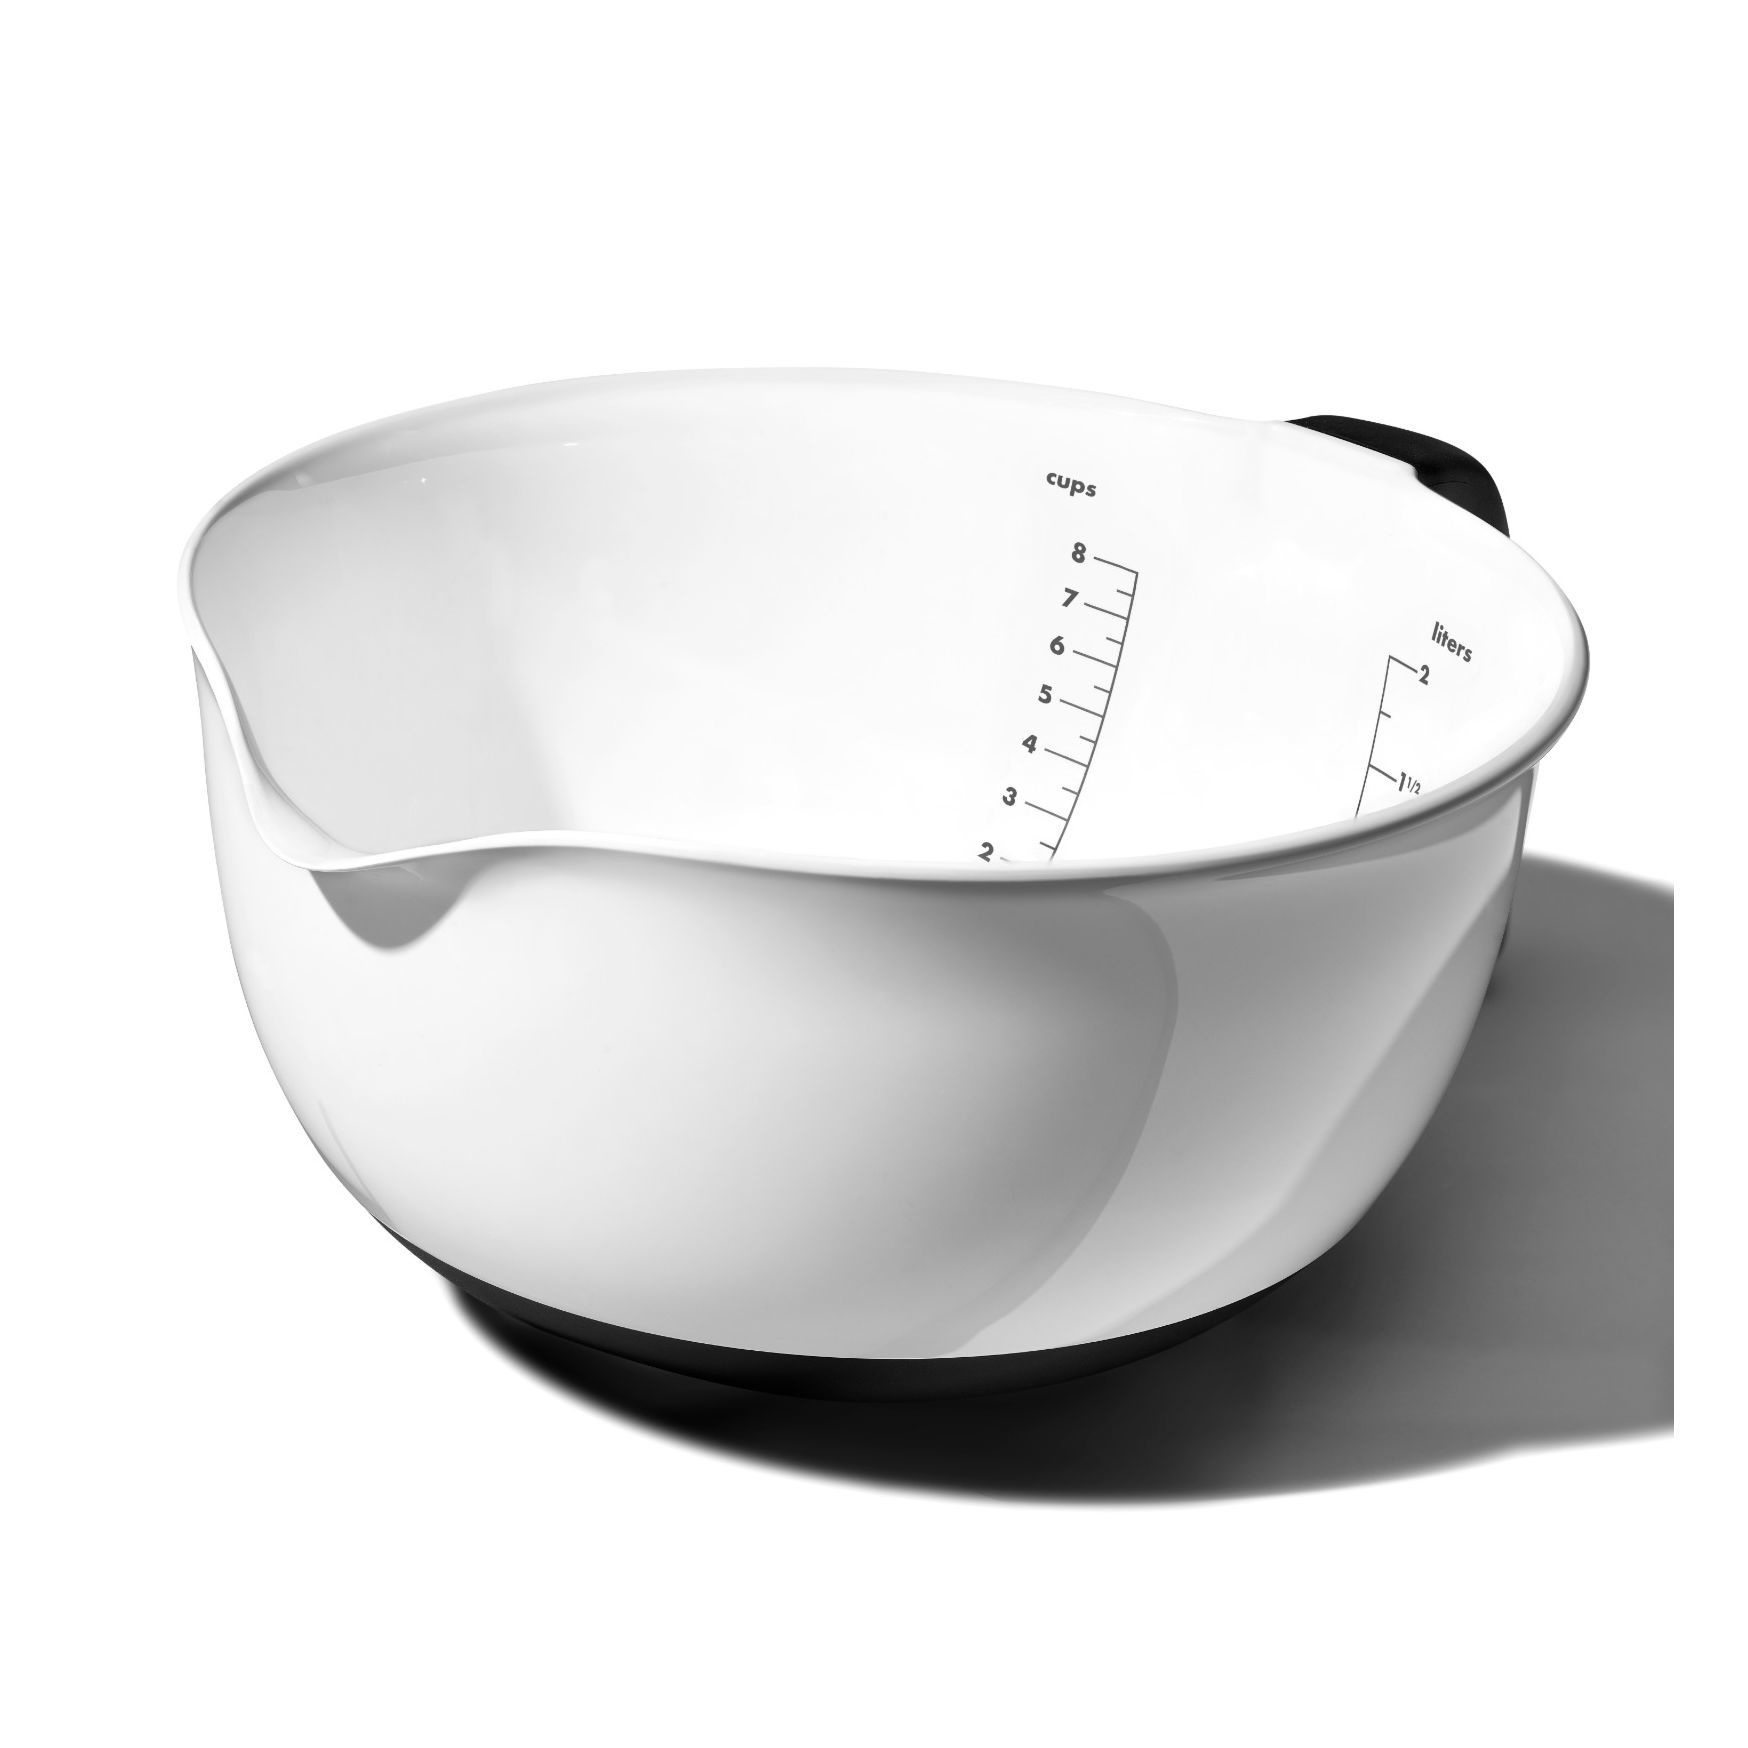 OXO Good Grips Batter Bowl, 8 Cup